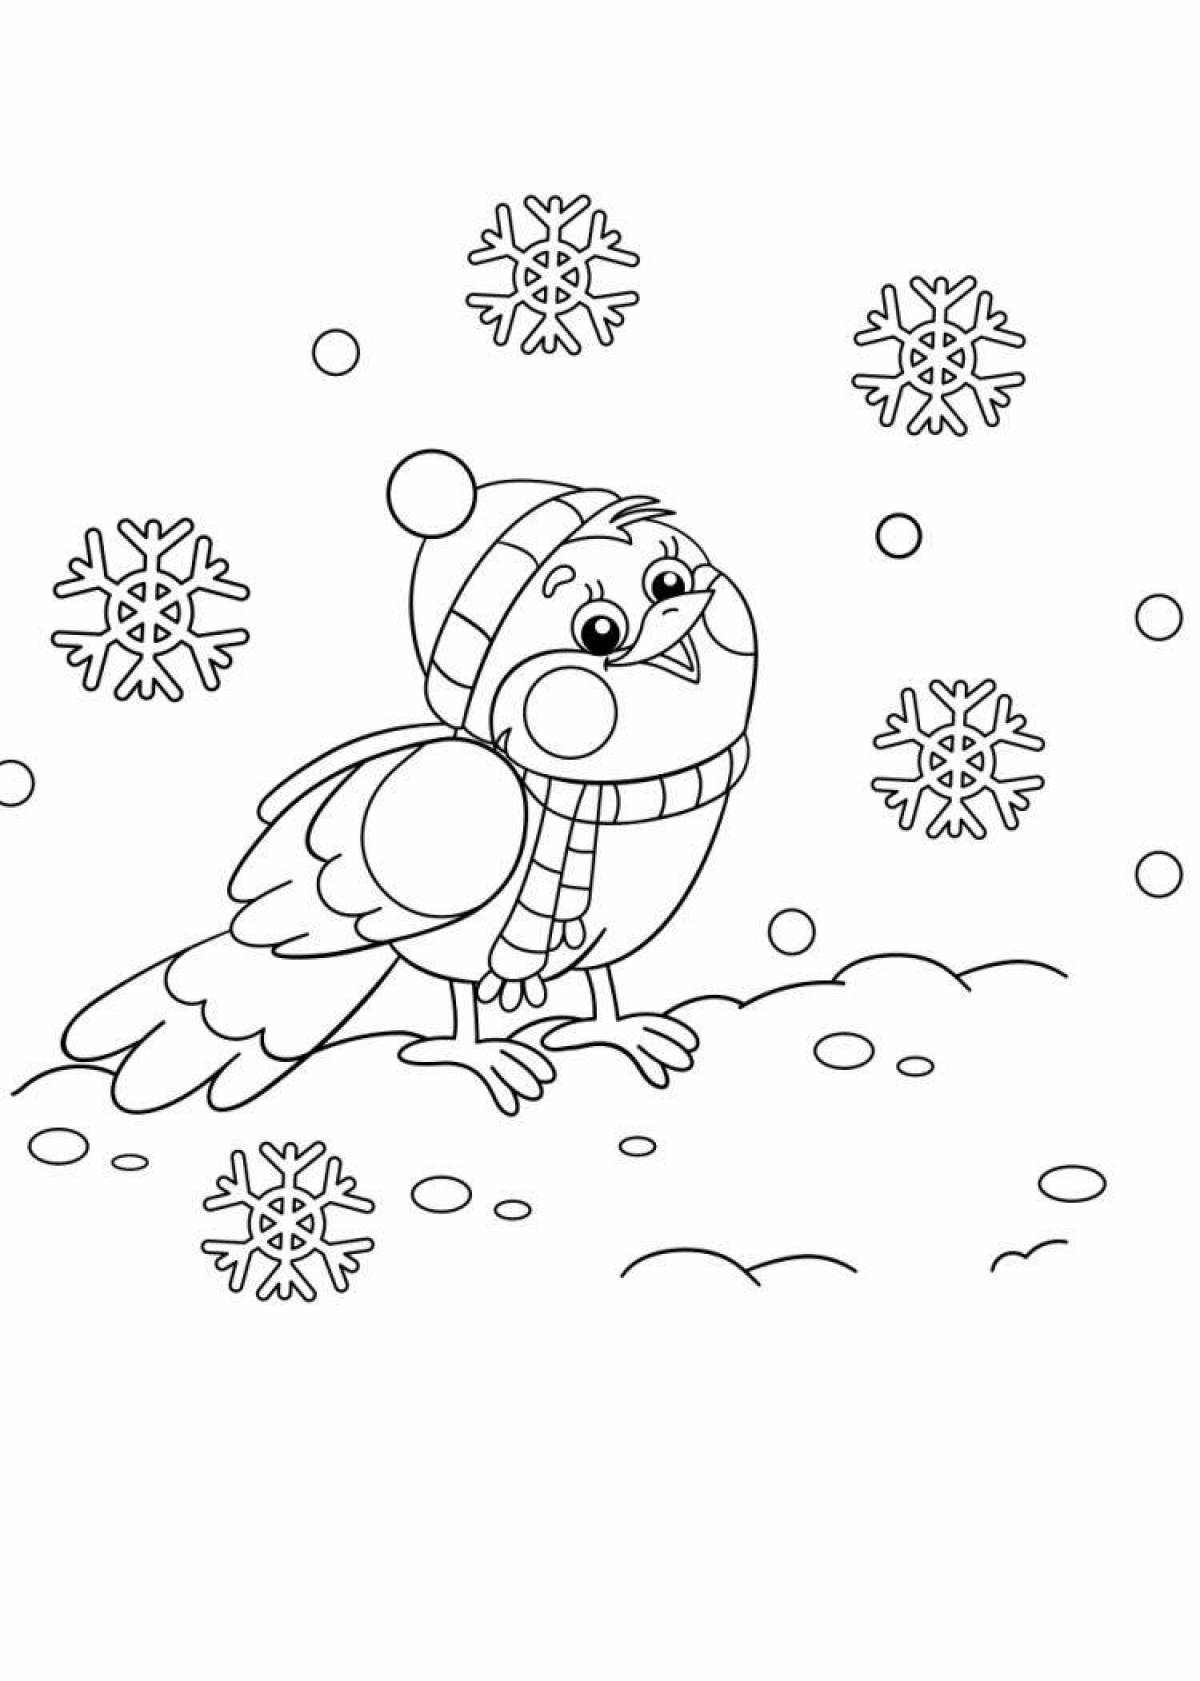 Glitter Christmas bird coloring page